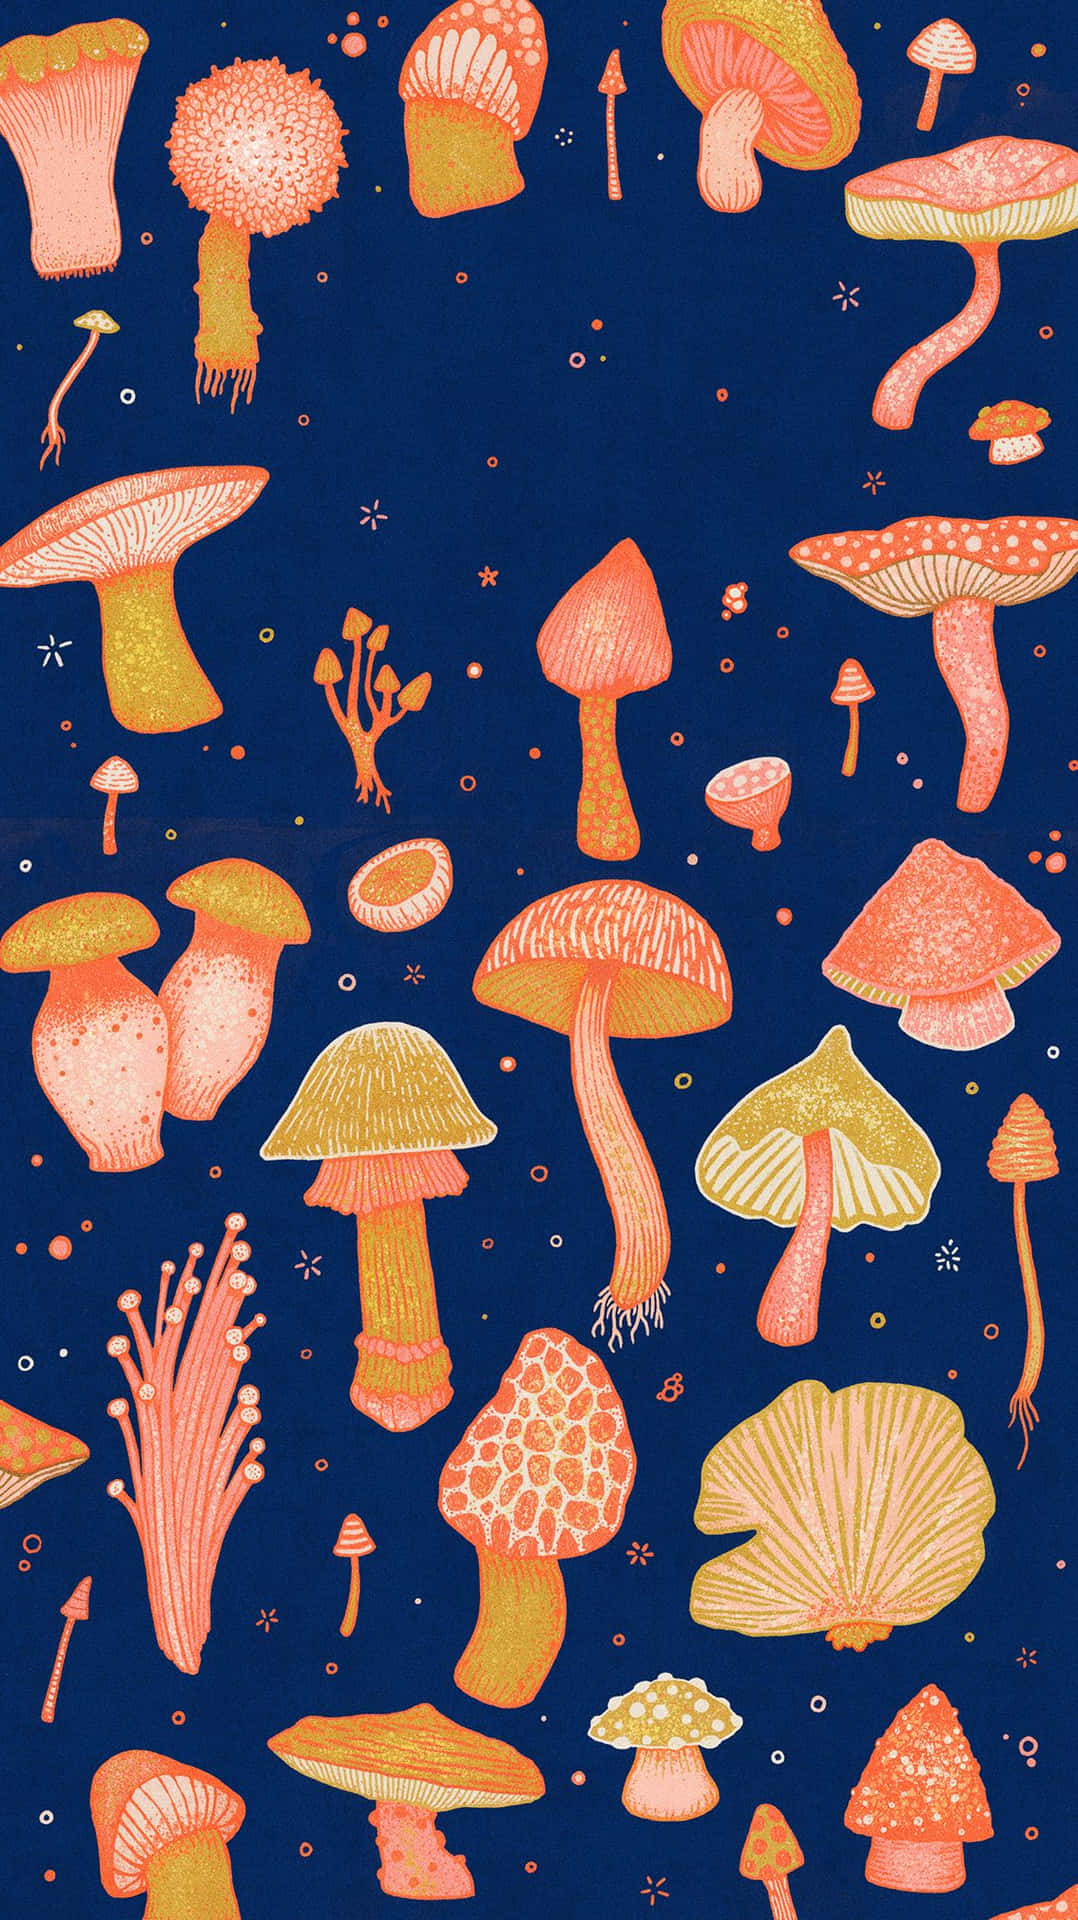 Download Unlock Nature's Power with the Mushroom Phone Wallpaper ...